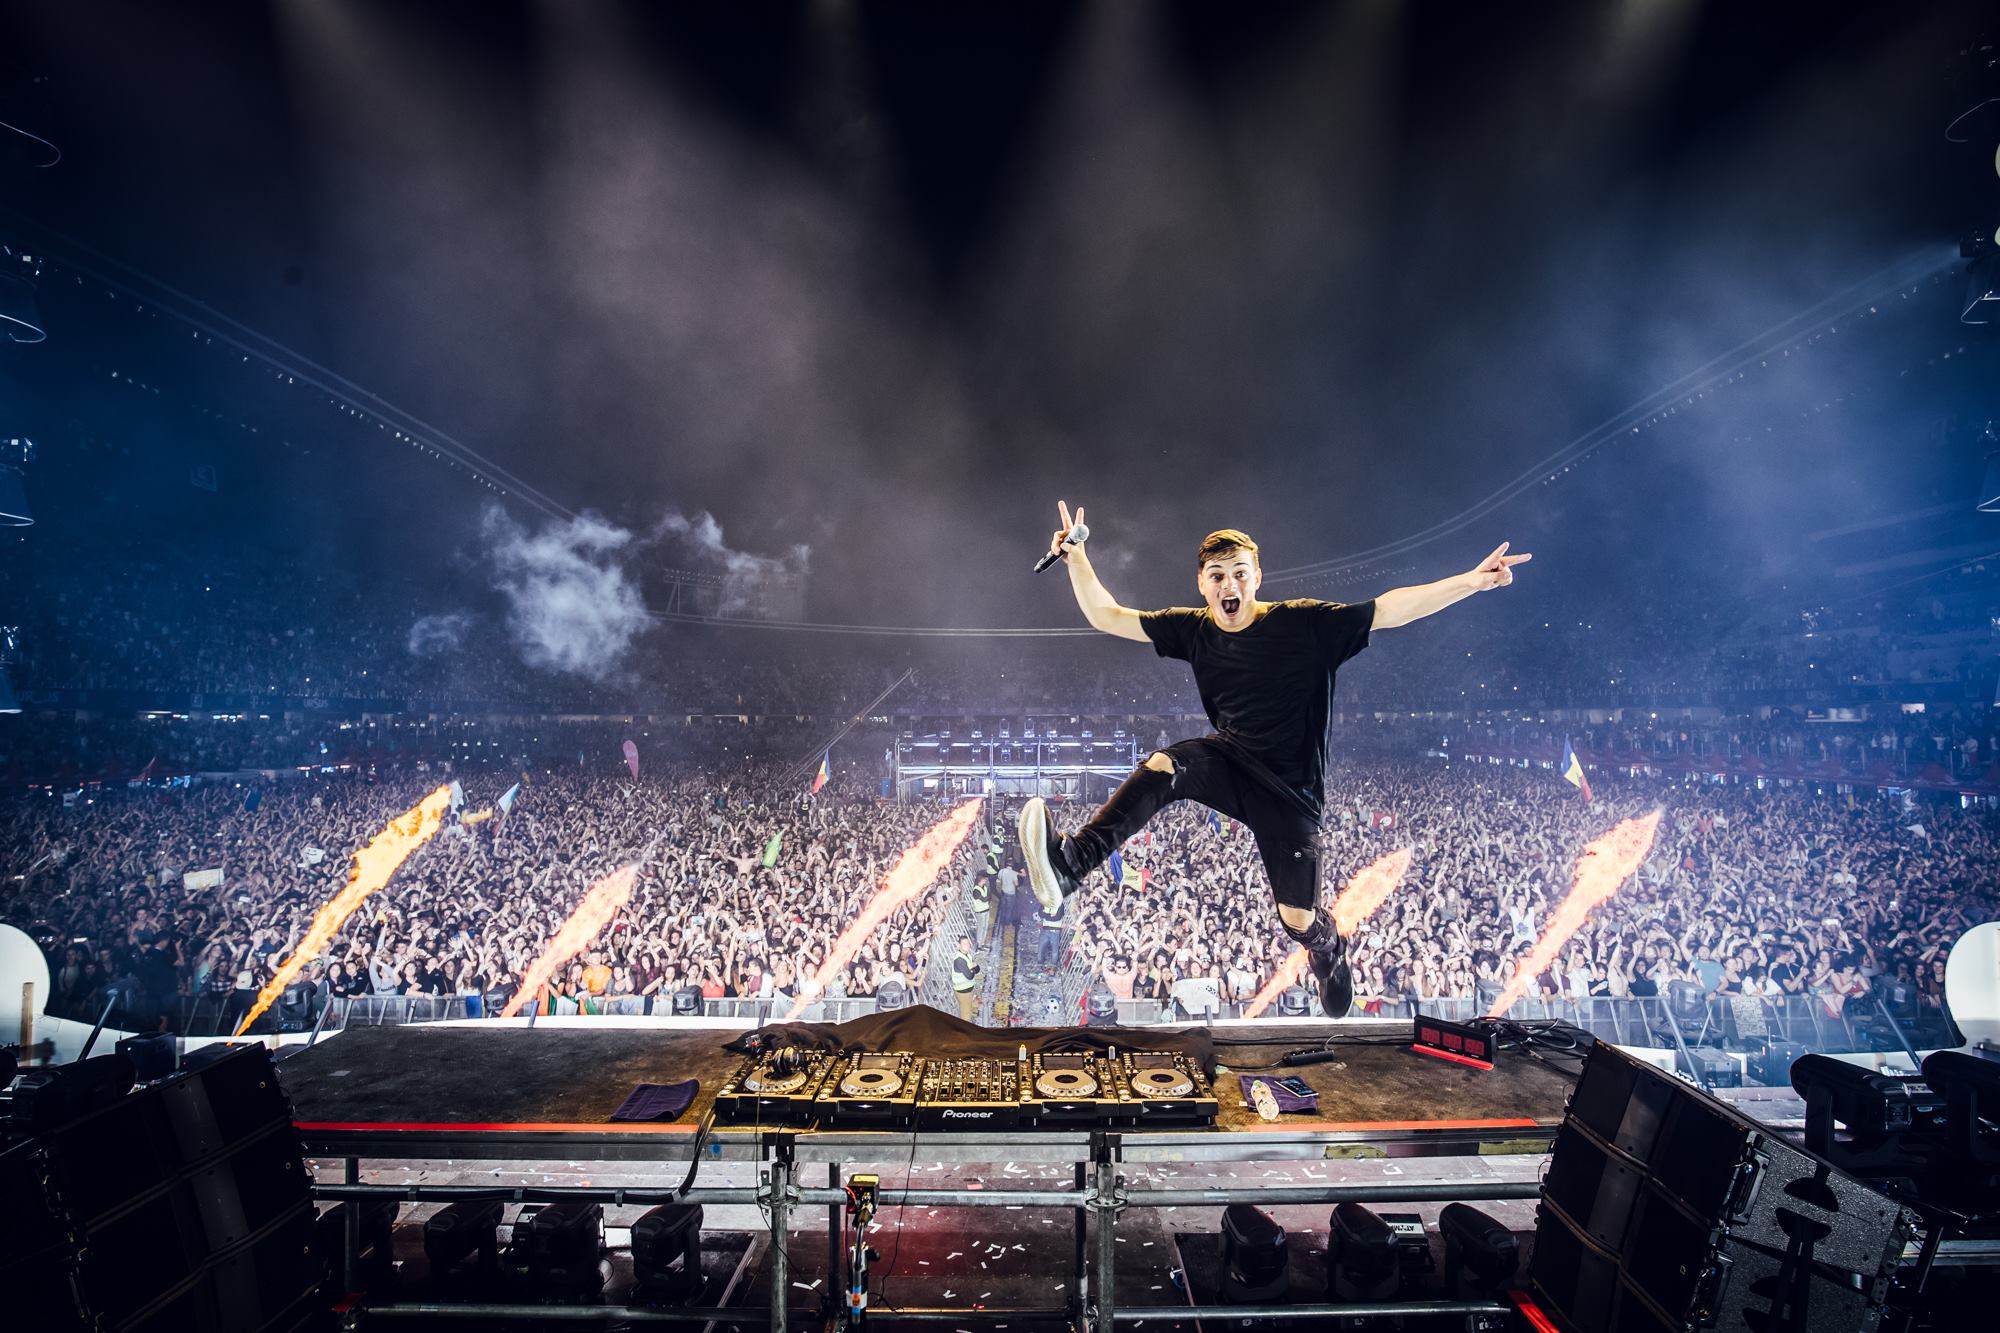 MARTIN GARRIX TEASES NEW TRACK, ‘SCARED TO BE LONELY’ LISTEN